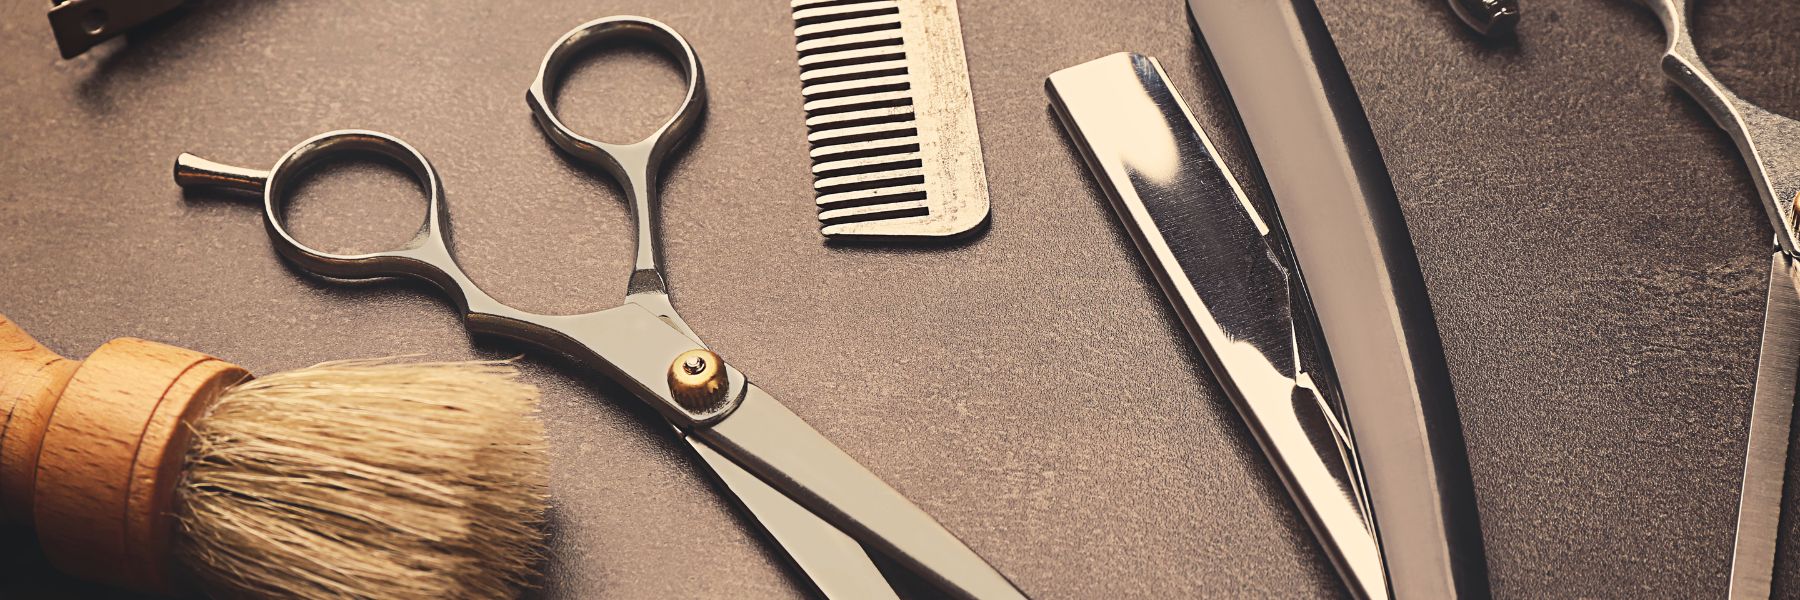 The Best Barber Supply Stores in the US: A Review of the Top 10